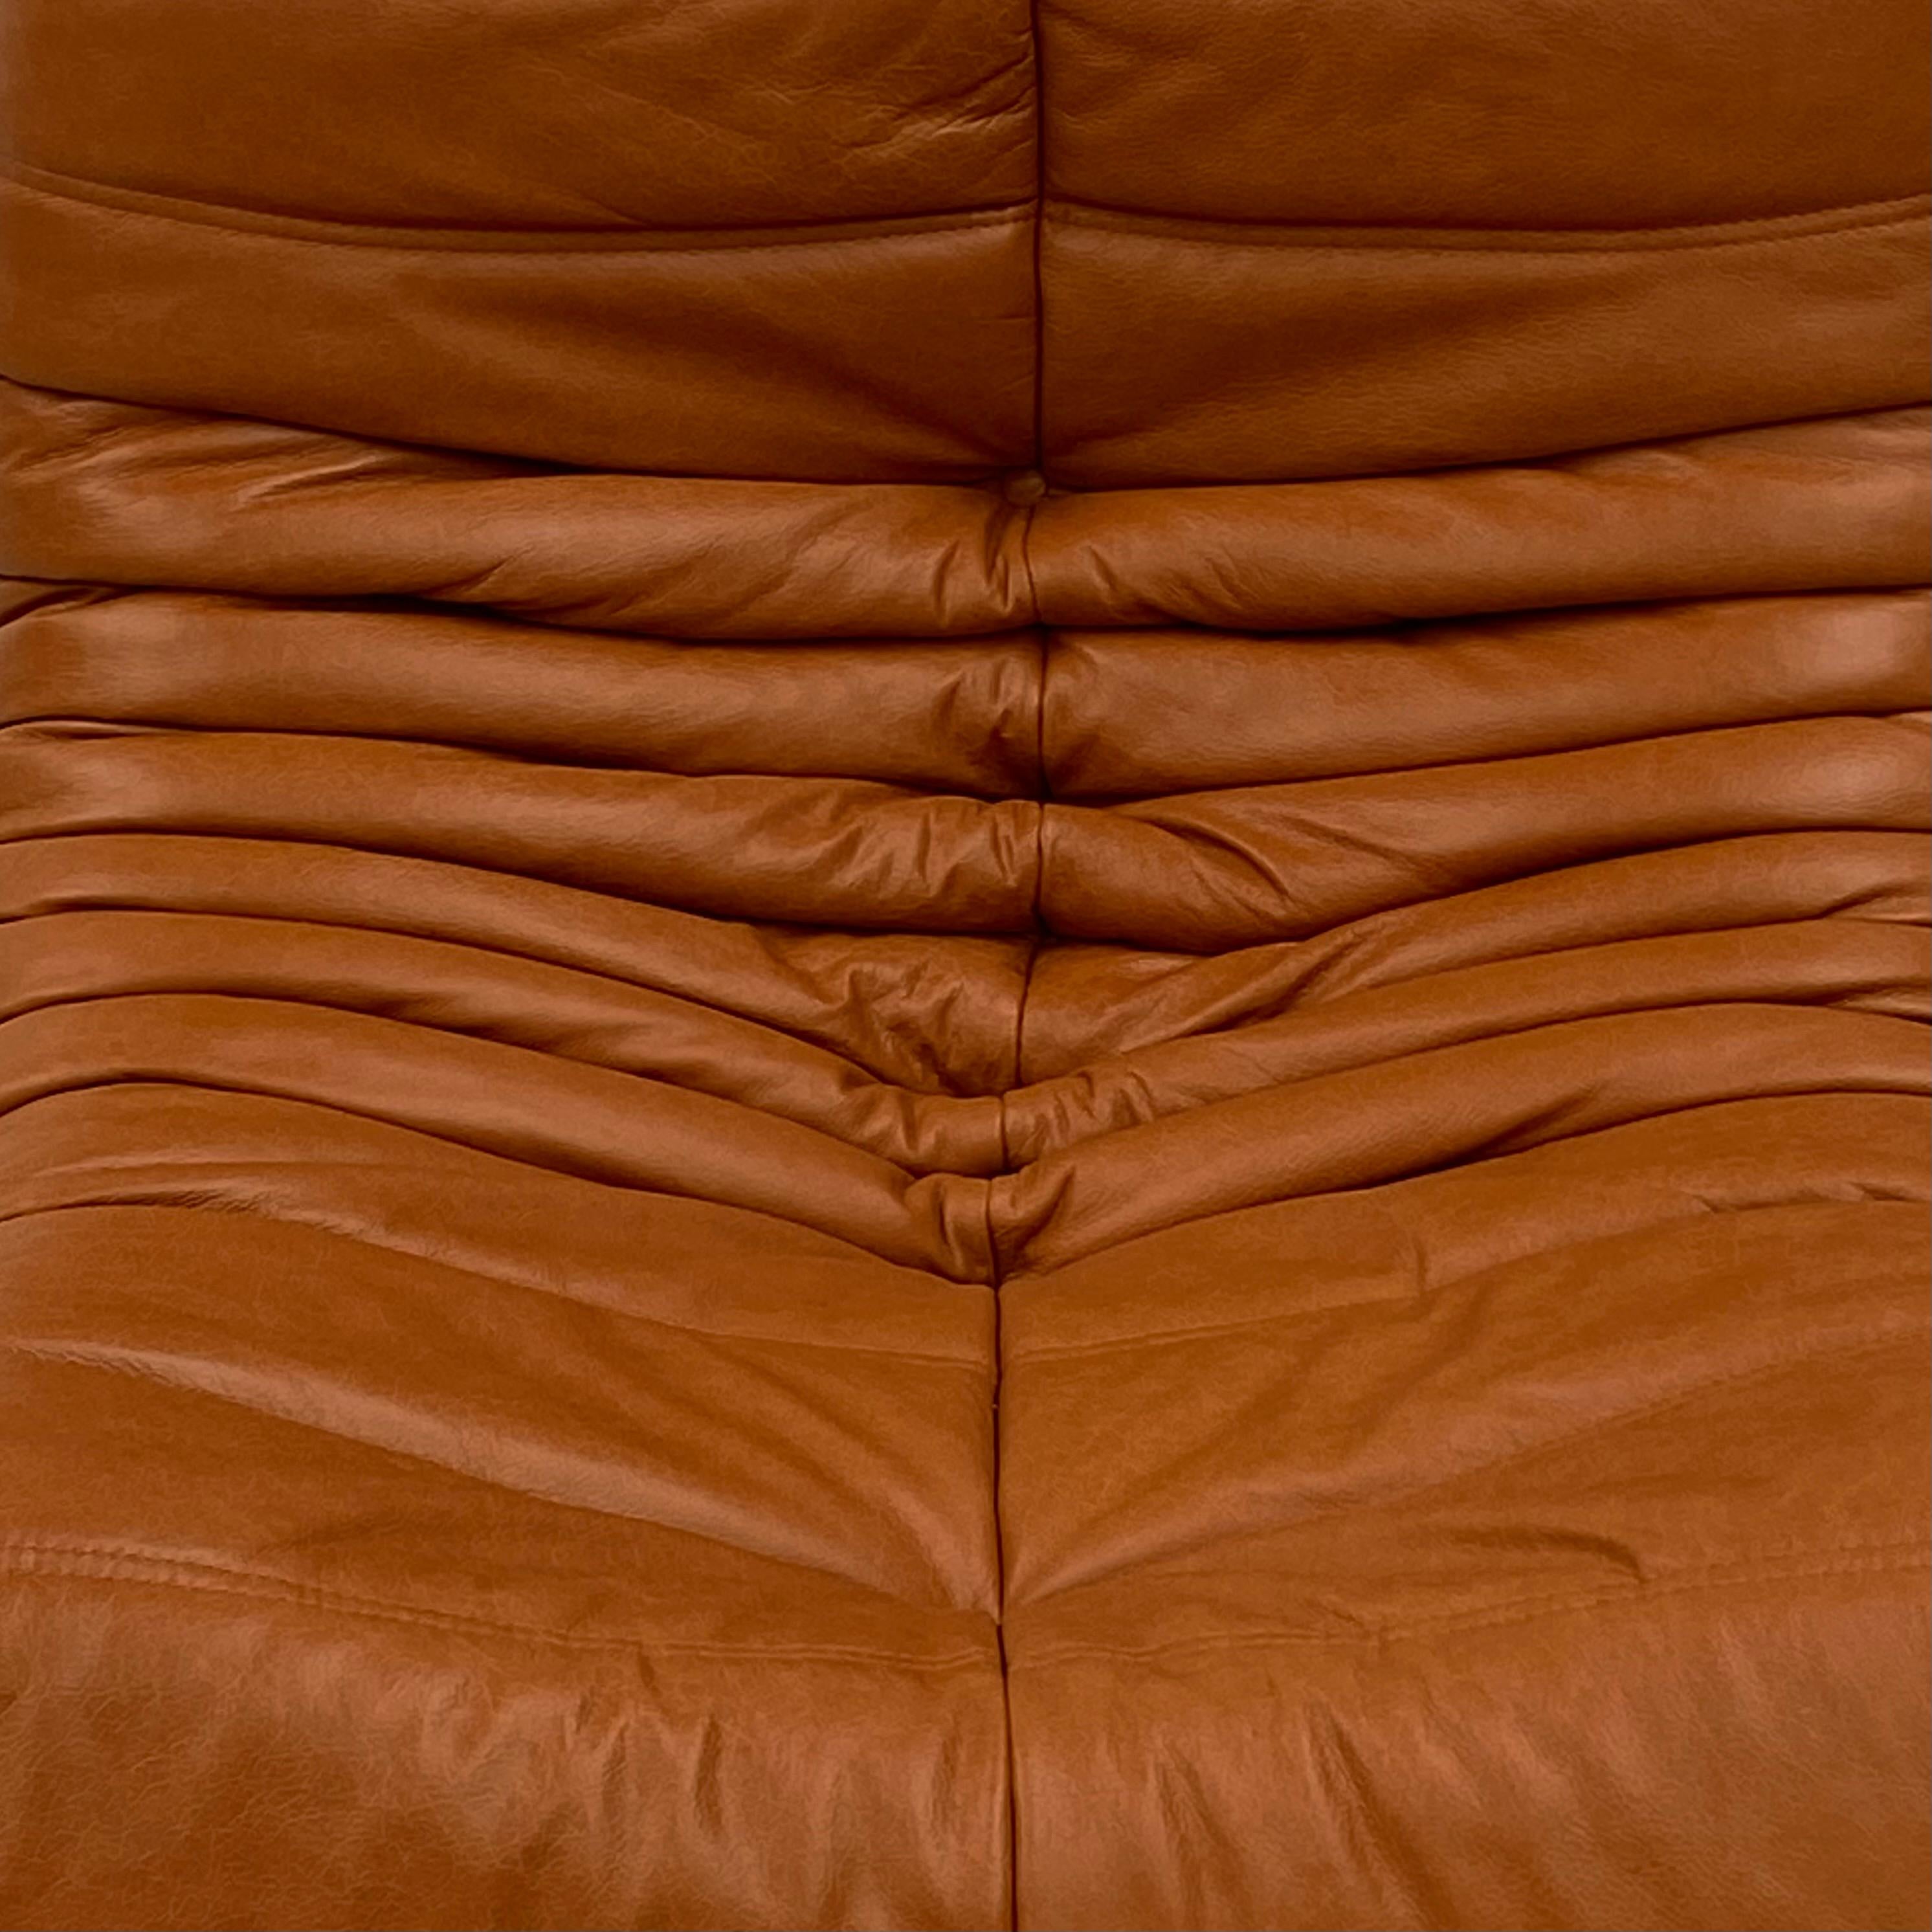 20th Century French Vintage Togo Chair in Brown Leather by Michel Ducaroy for Ligne Roset.